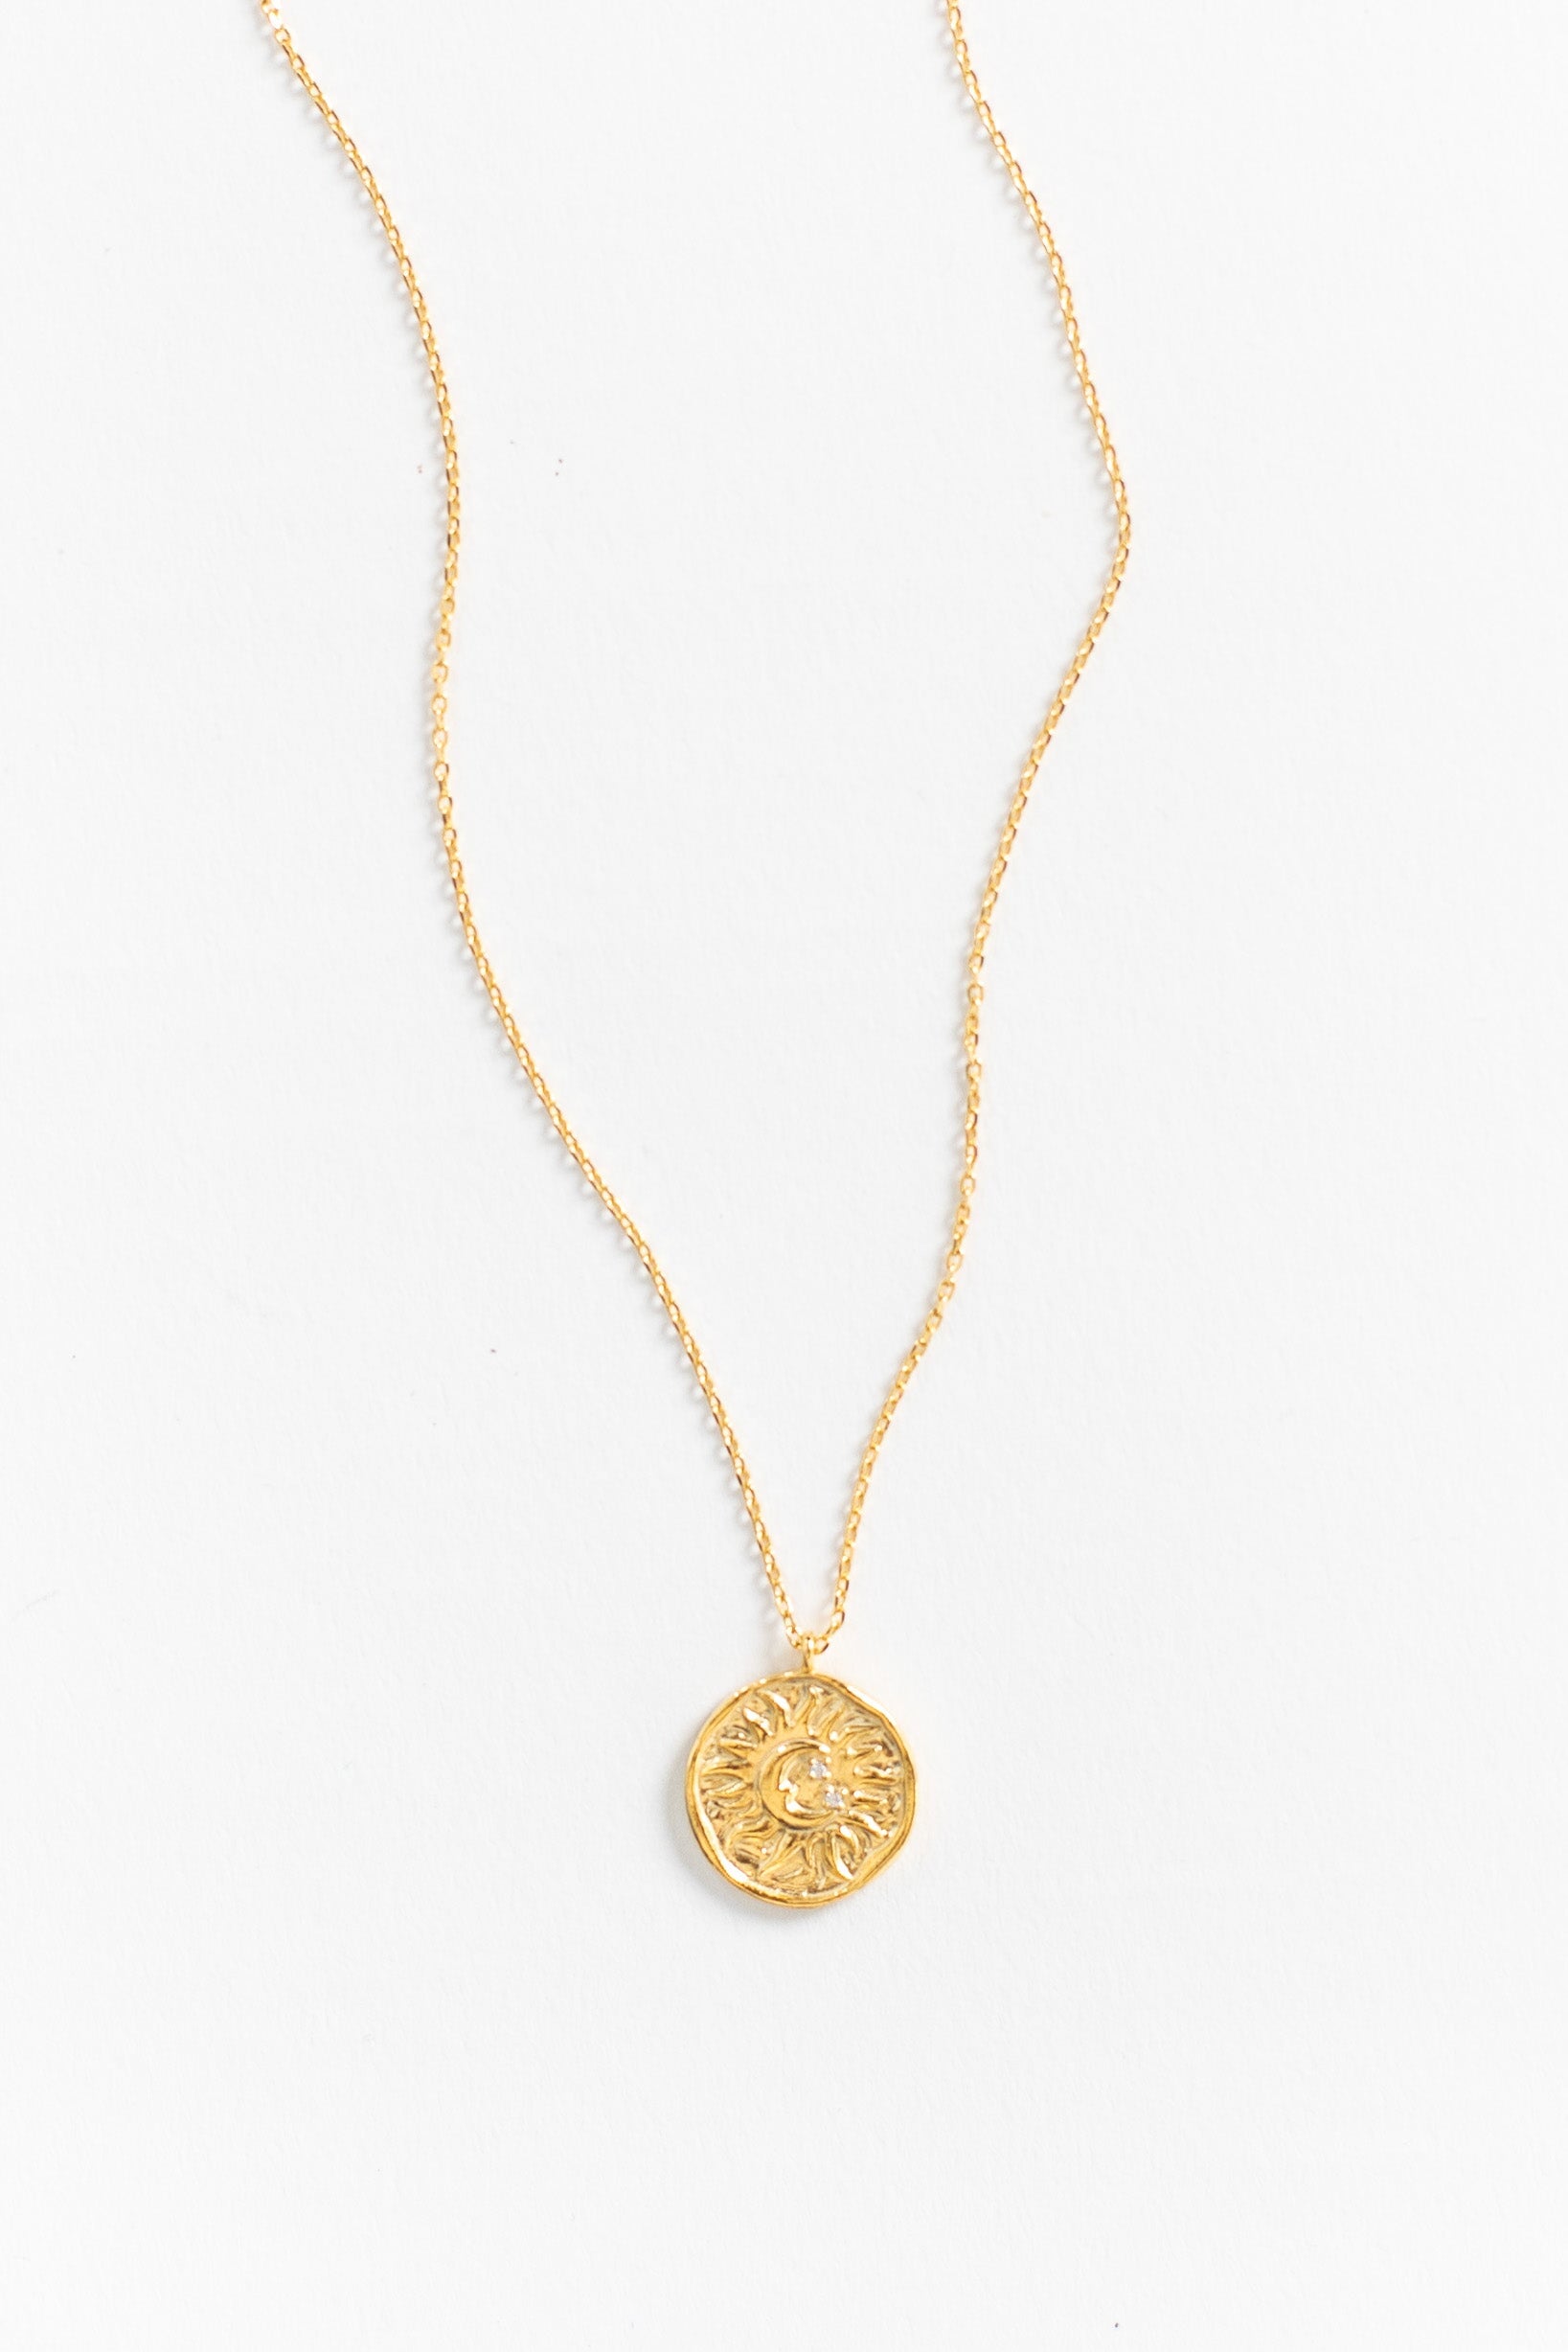 Moon Necklace WOMEN'S NECKLACE Cove Gold Plated 16" 